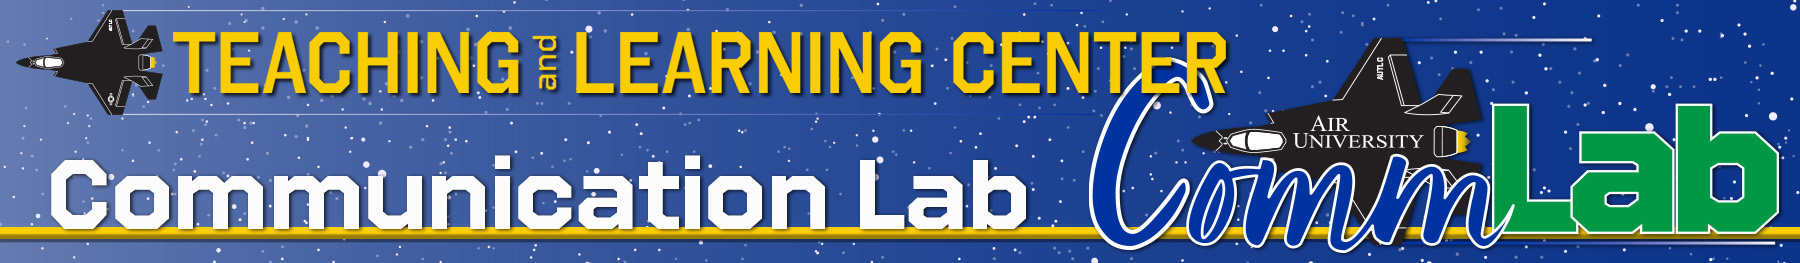 AU Teaching and Learning Center Communication Lab Banner